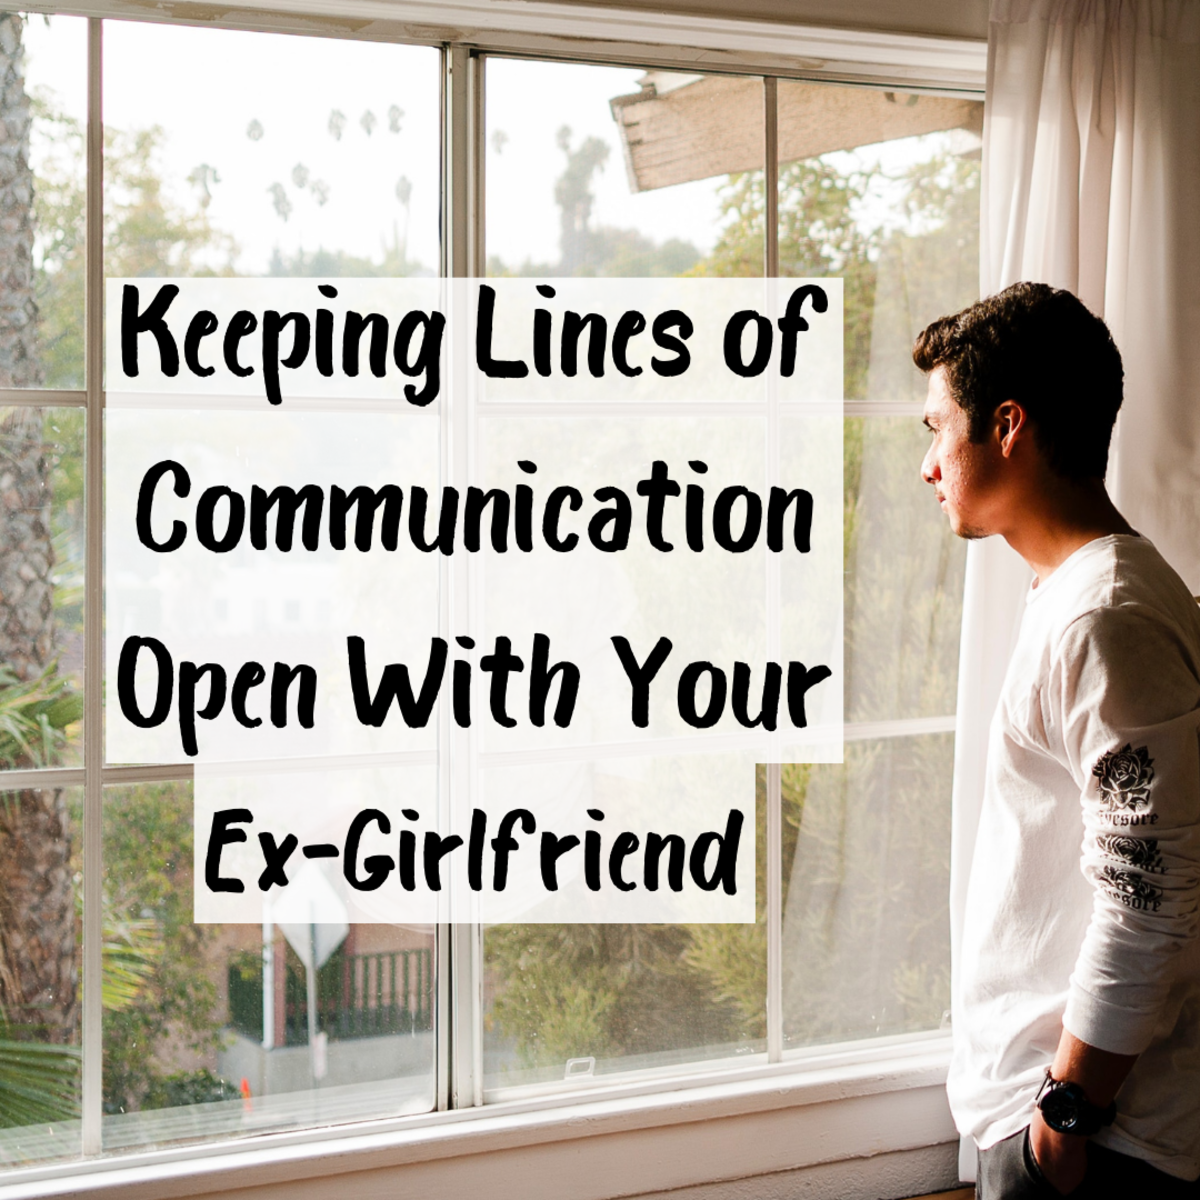 This article gives 5 helpful tips for restarting communication with an ex and rekindling an old flame.